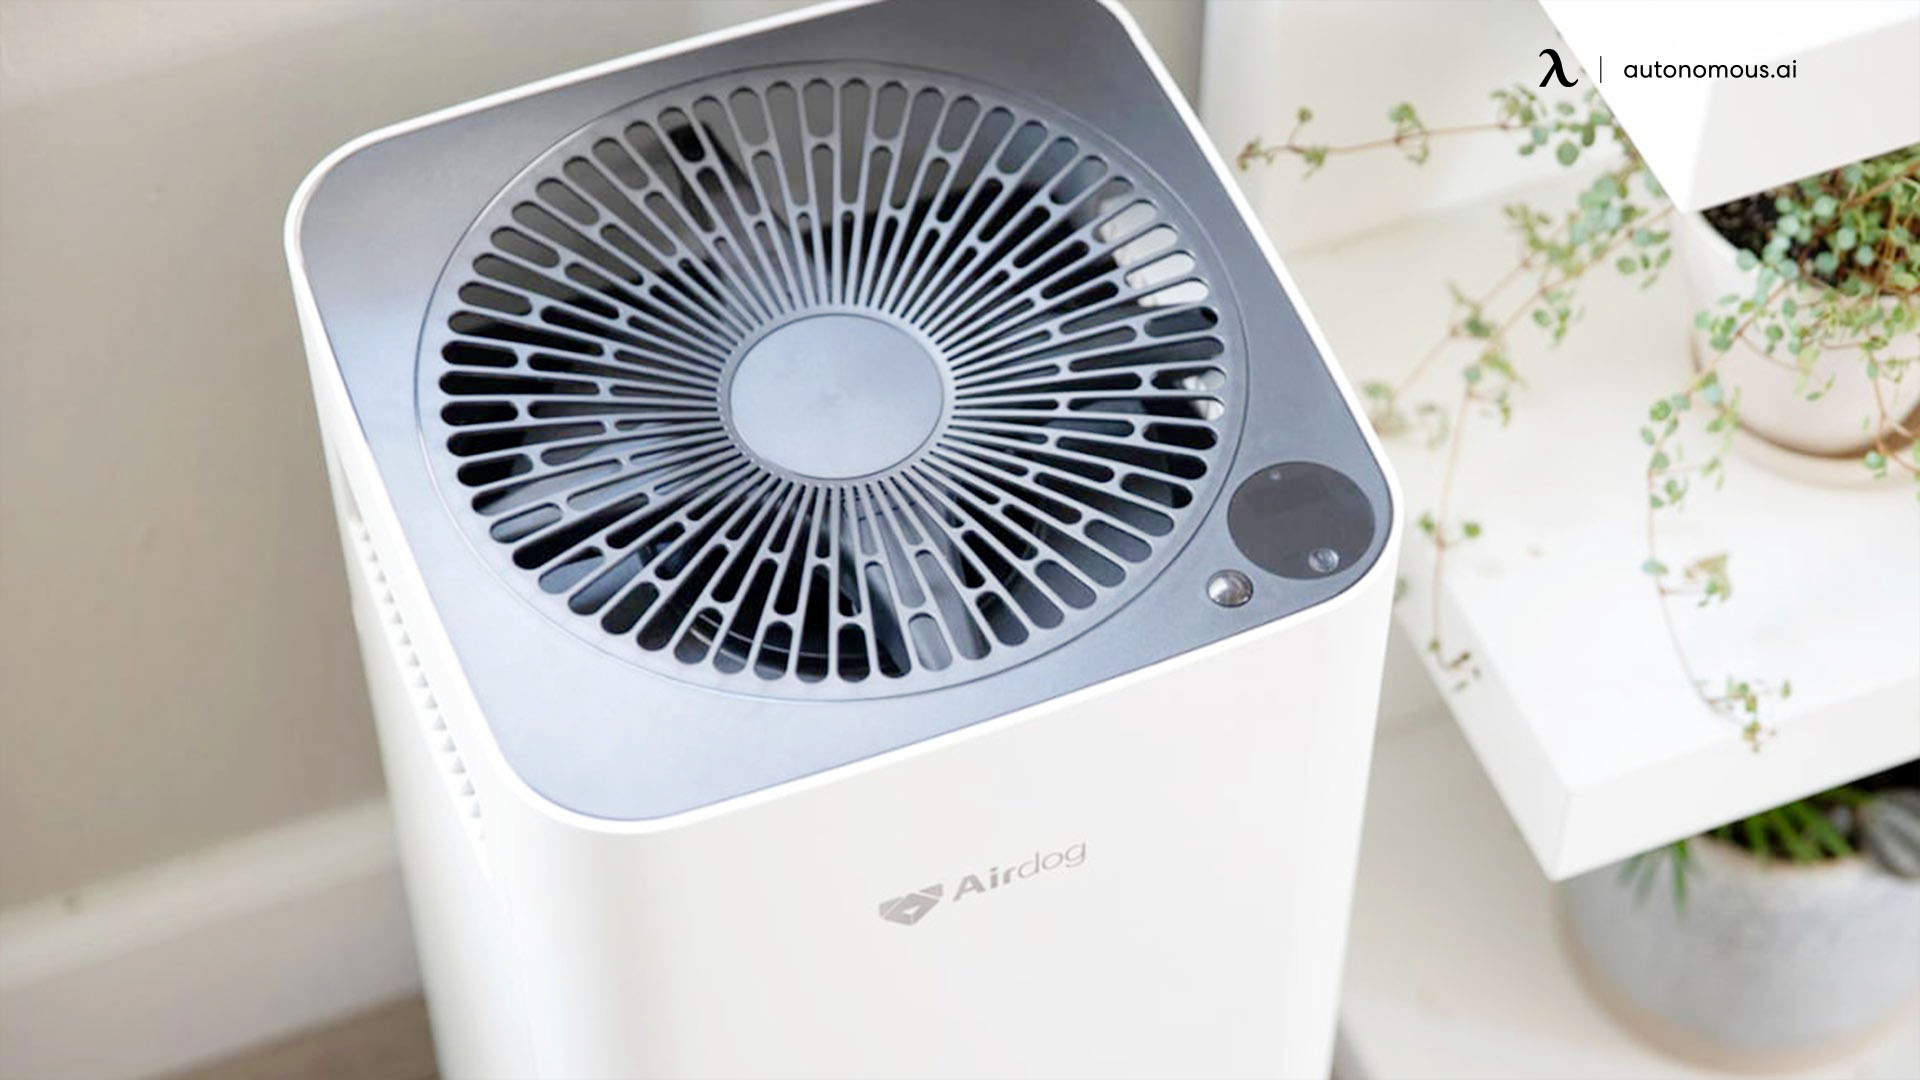 Functioning of Airdog X3 Home Air Purifier